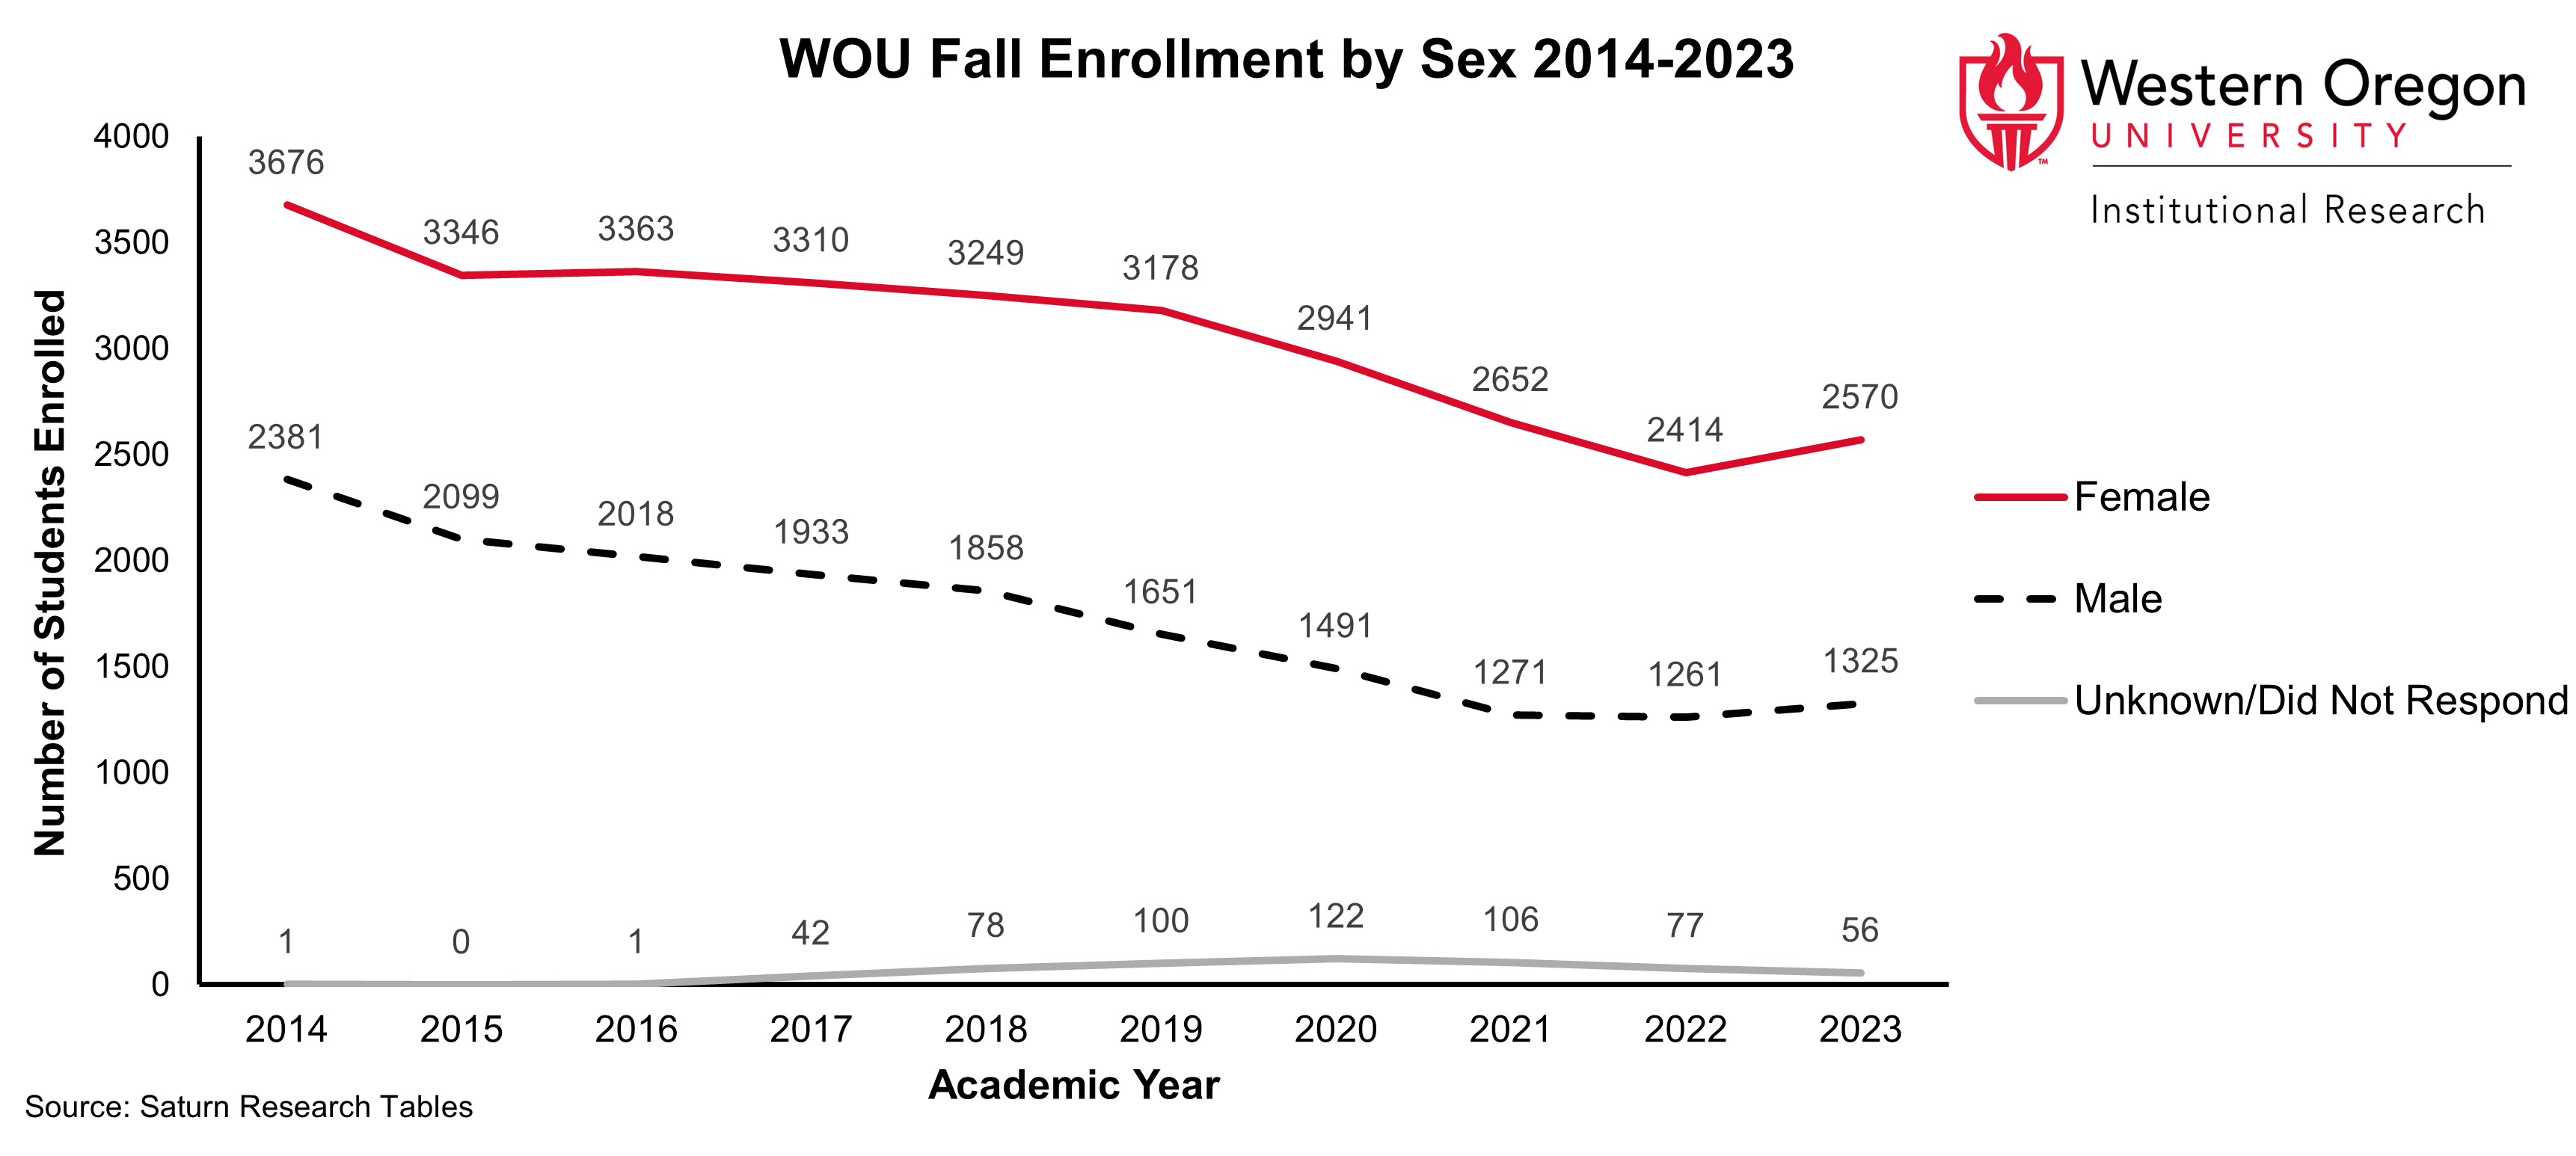 Bar graph of Fall enrollment counts since Fall 2010 for WOU students, showing that enrollment has been gererally declining since Fall 2014.